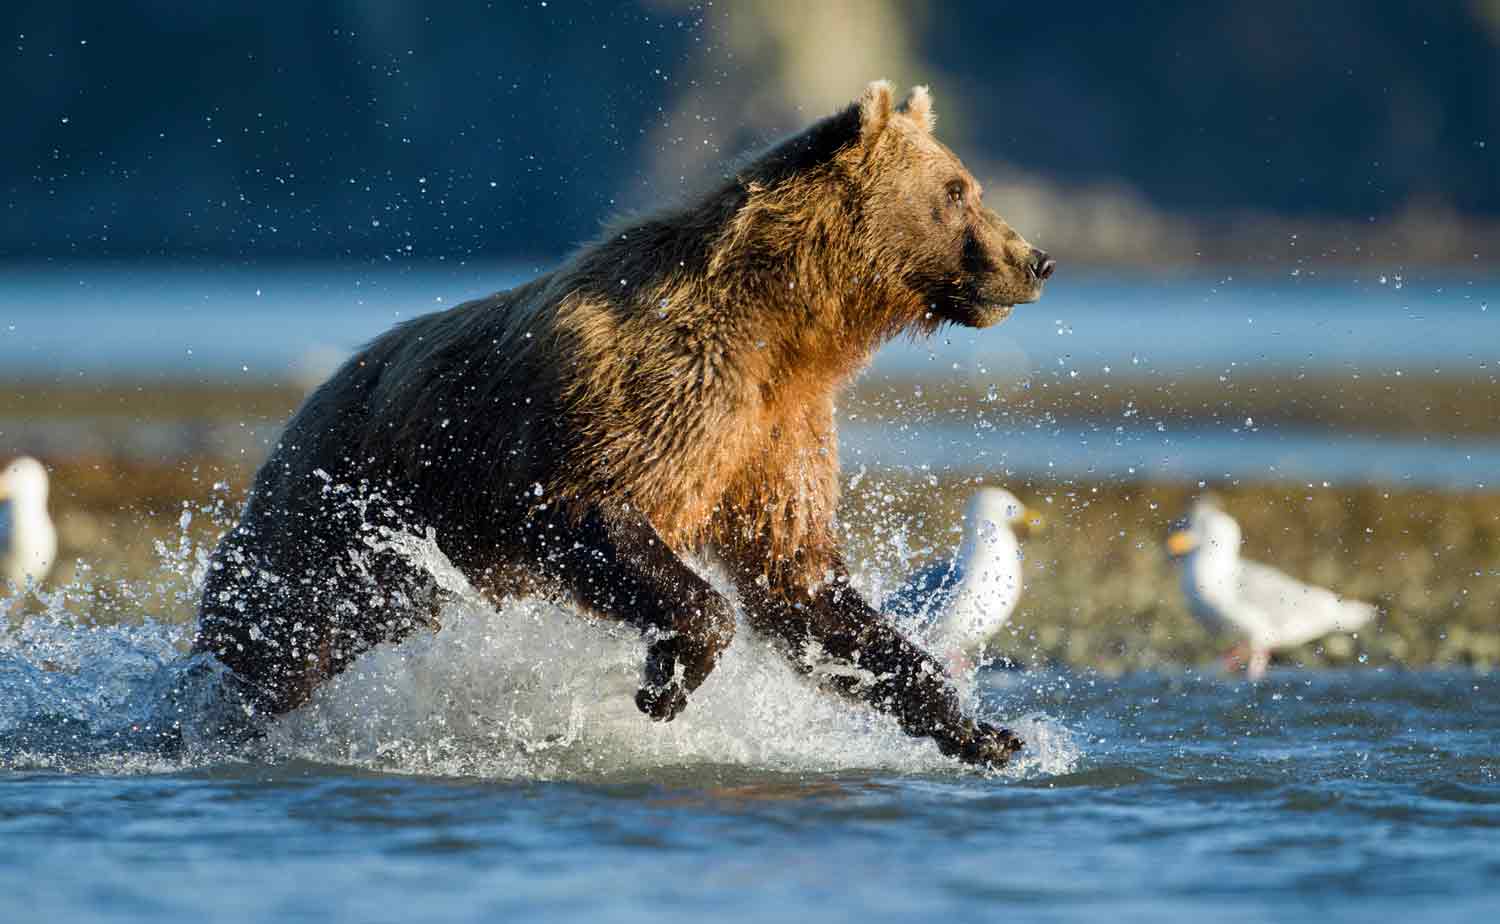 A grizzly bear splashes in water with birds in the background.